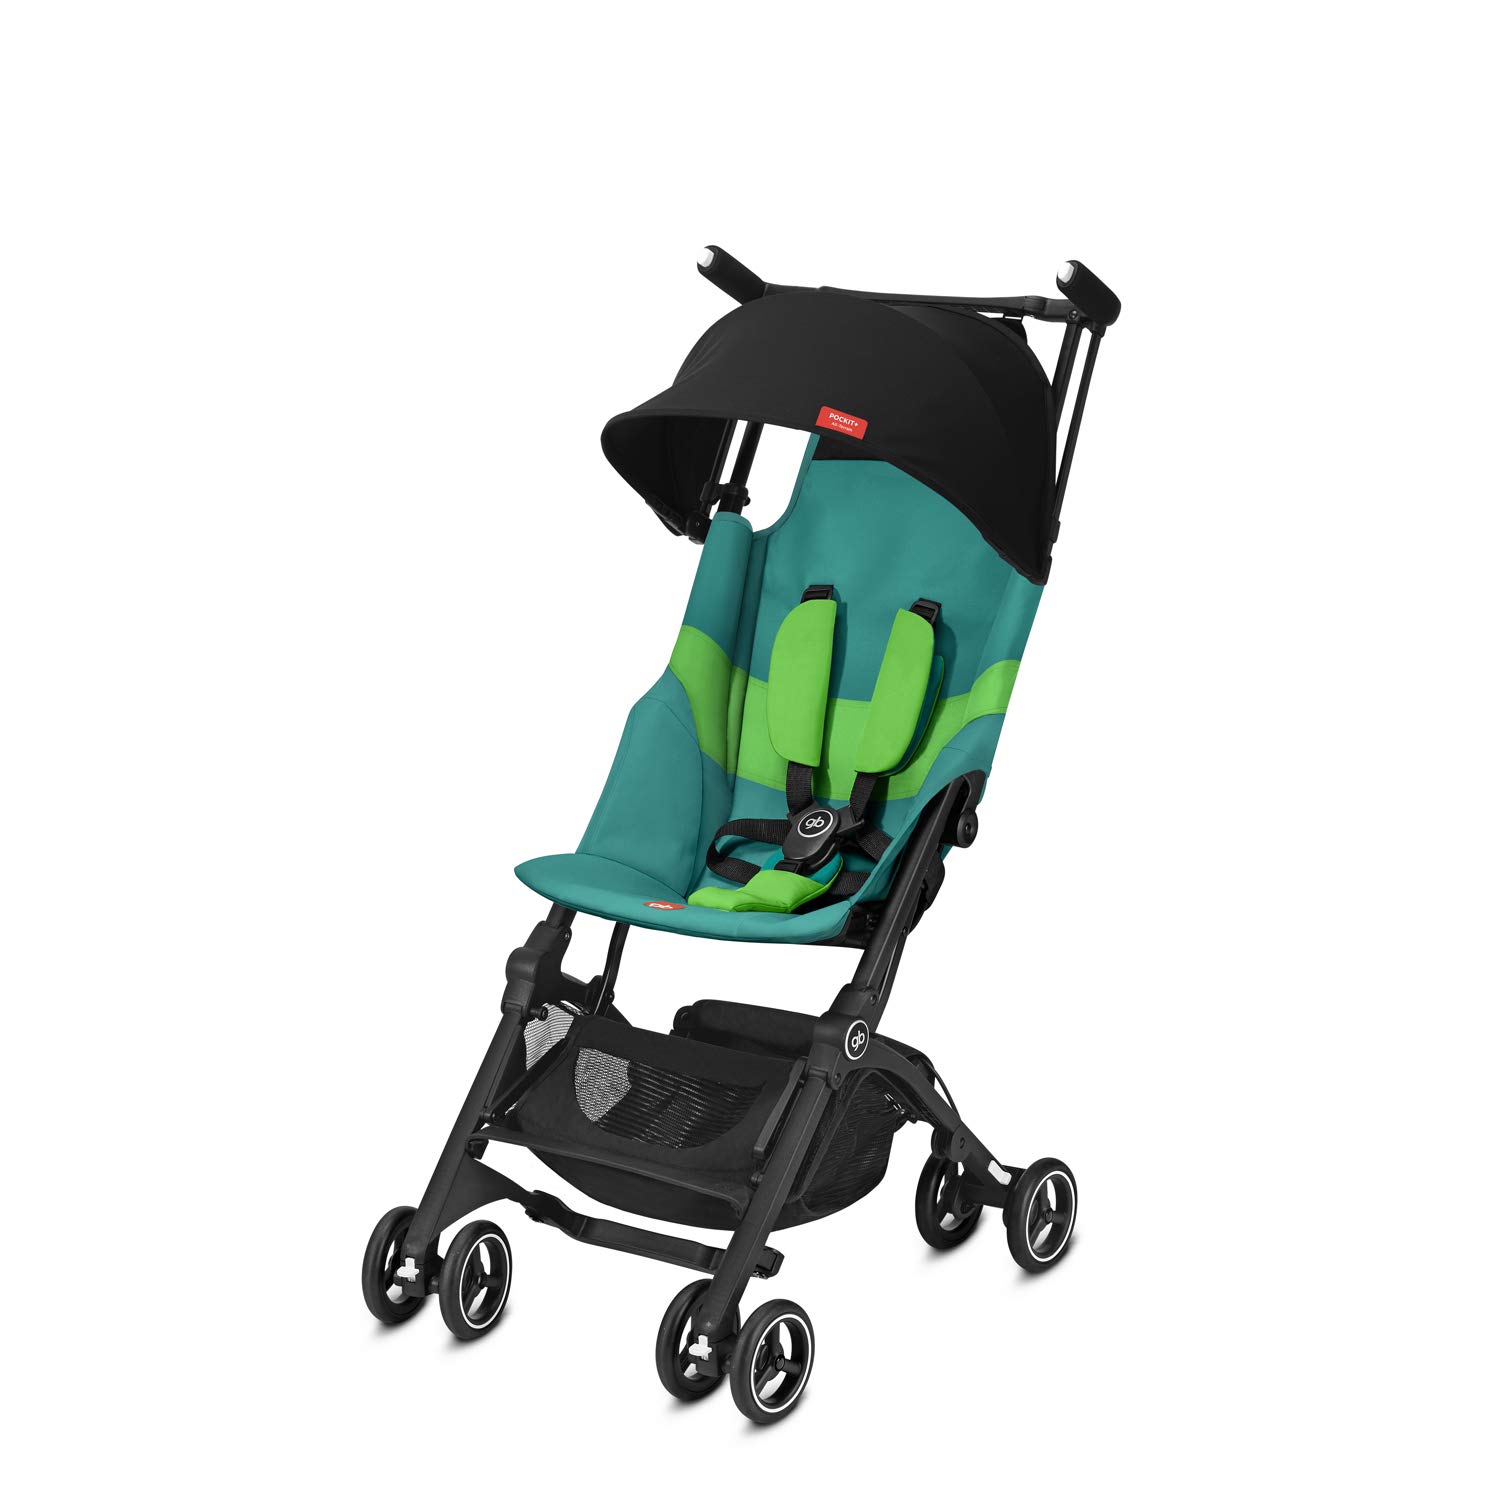 GB Gold Pockit+ All Terrain Buggy Ultra Compact from 6 Months to 17 kg Approximately 4 Years, Laguna Blue